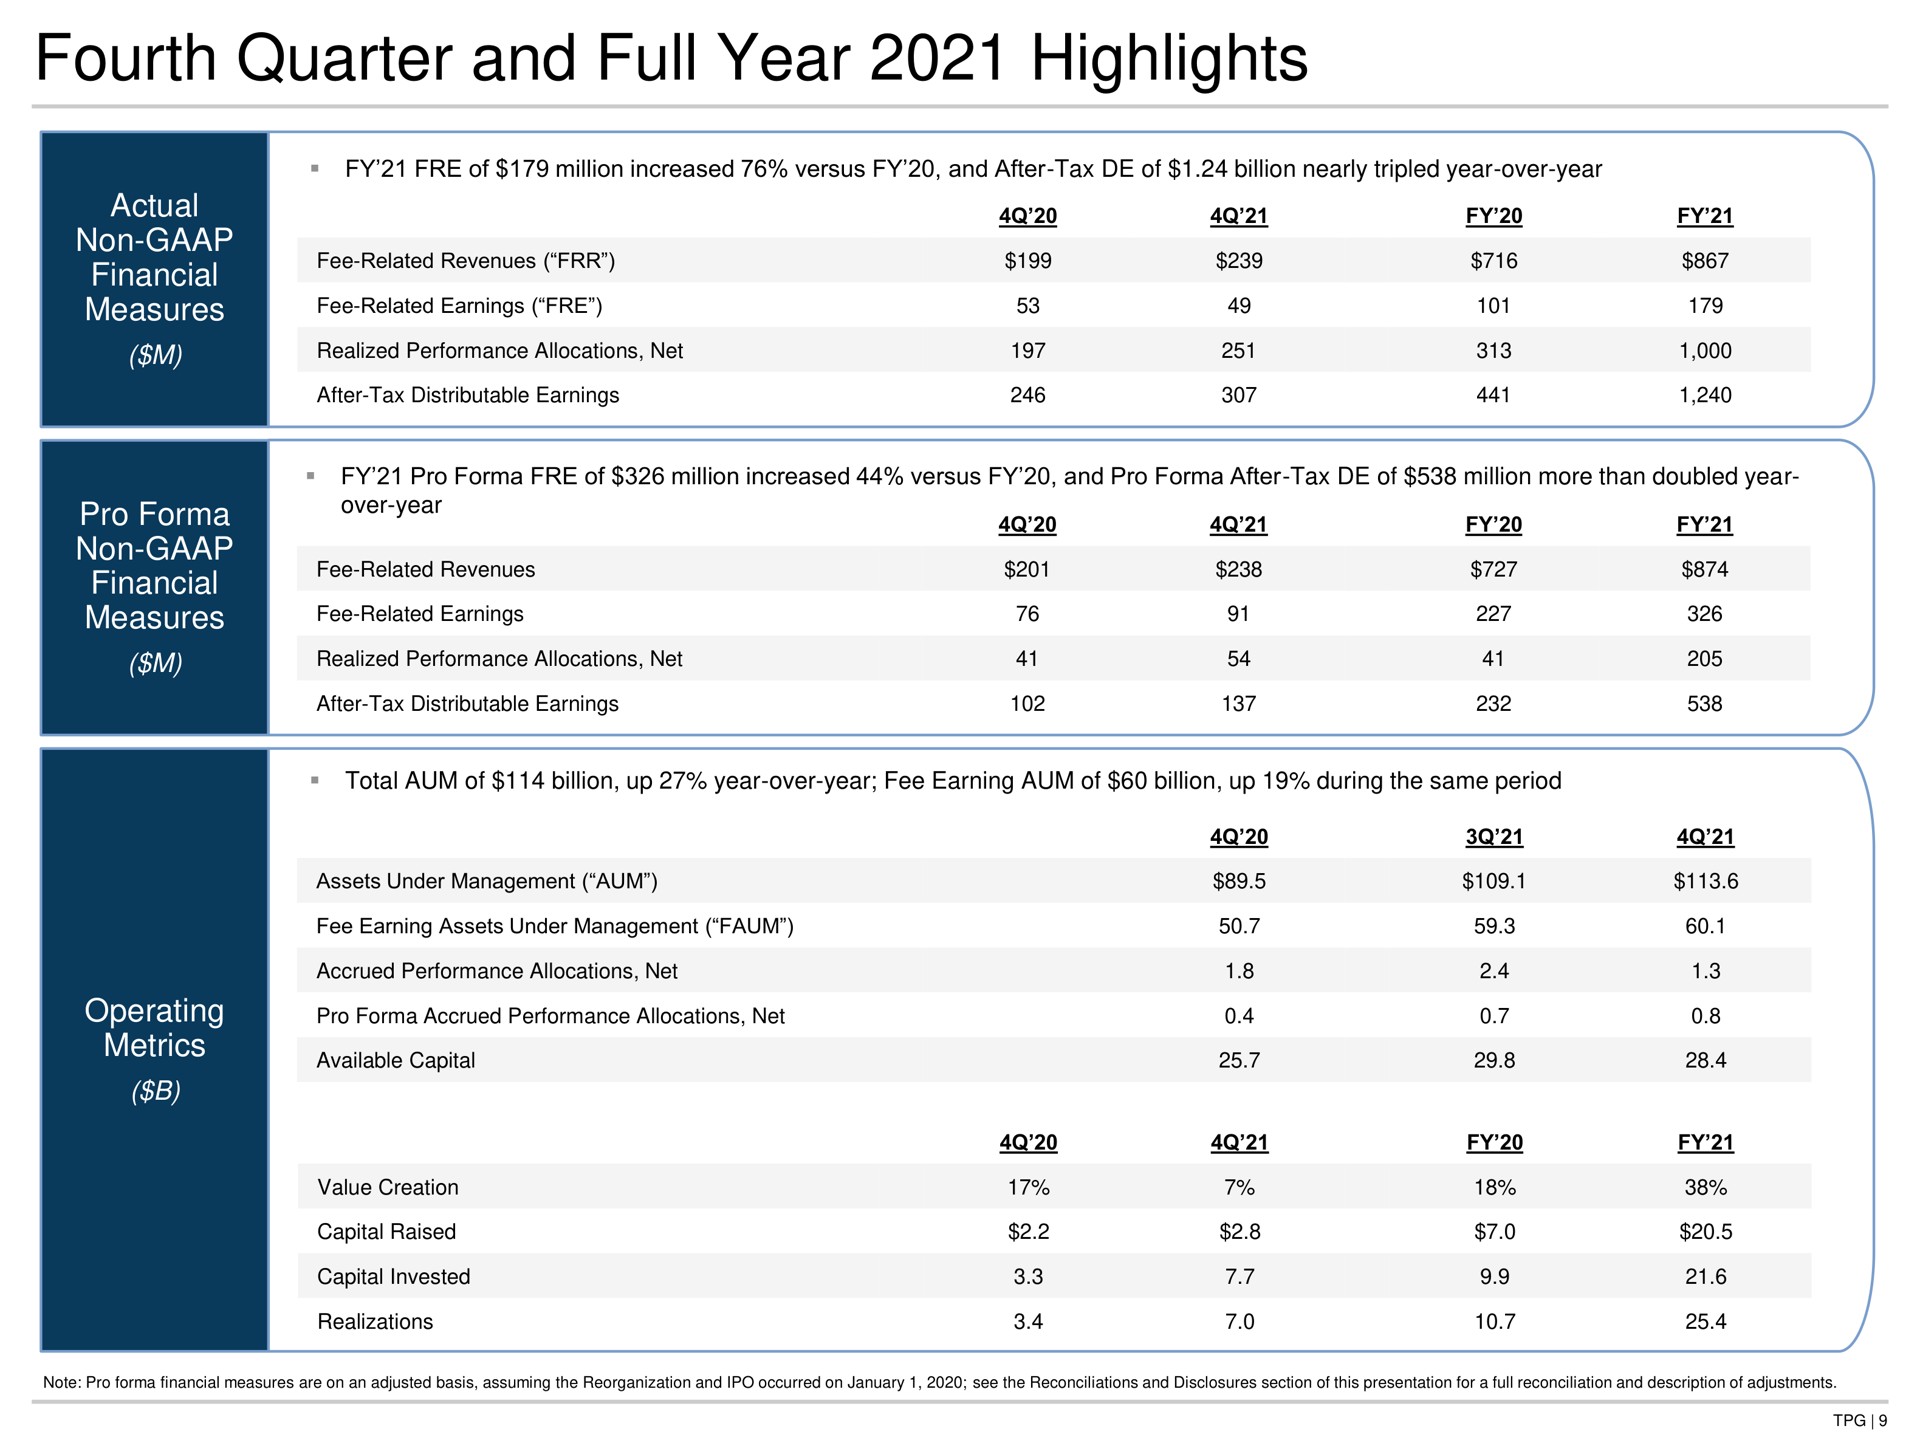 fourth quarter and full year highlights actual non financial measures pro non financial measures operating metrics over year available capital | TPG